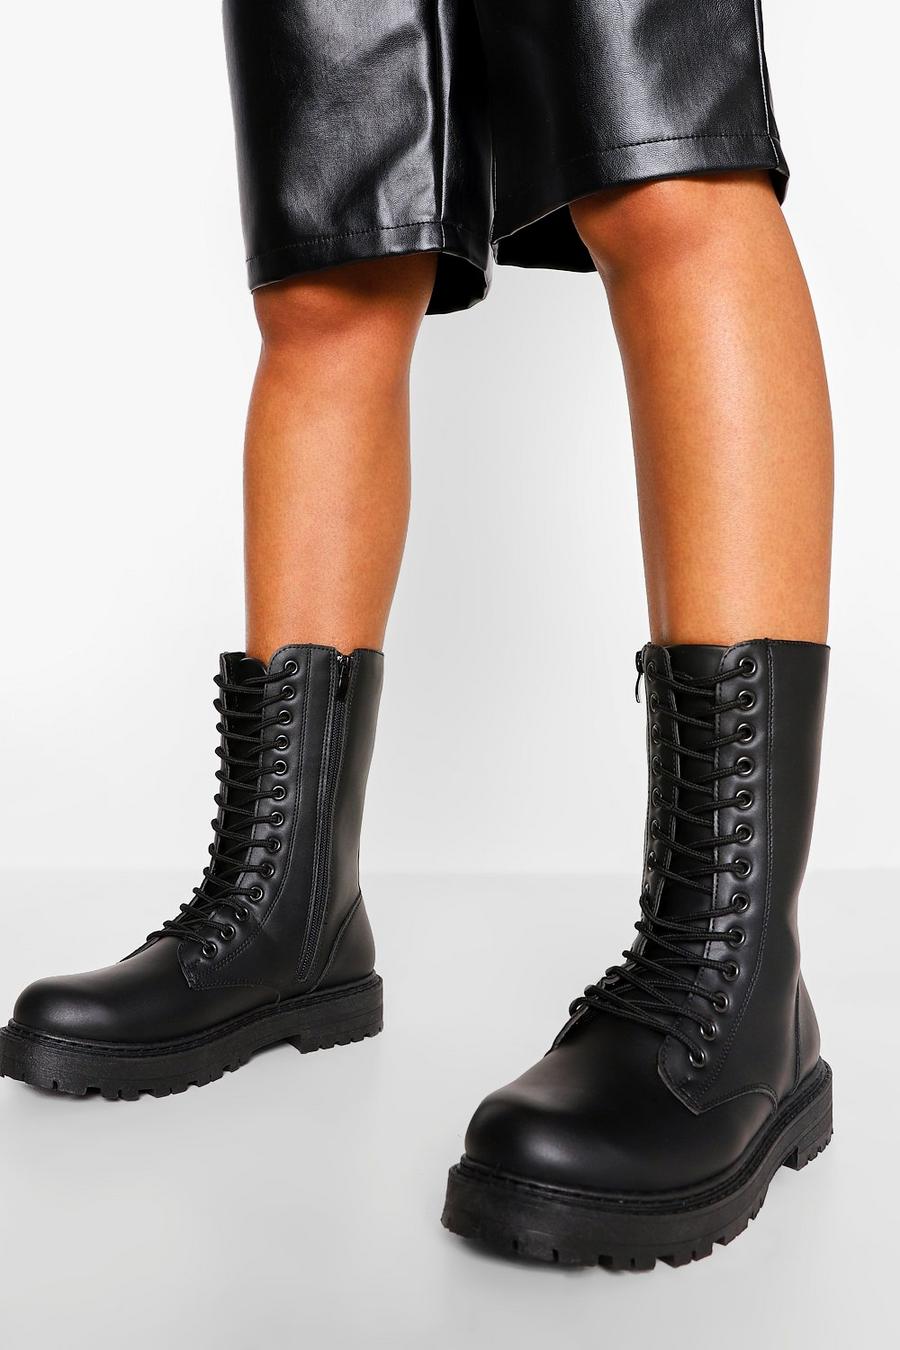 Black Wide Width Calf High Chunky Combat Boots image number 1